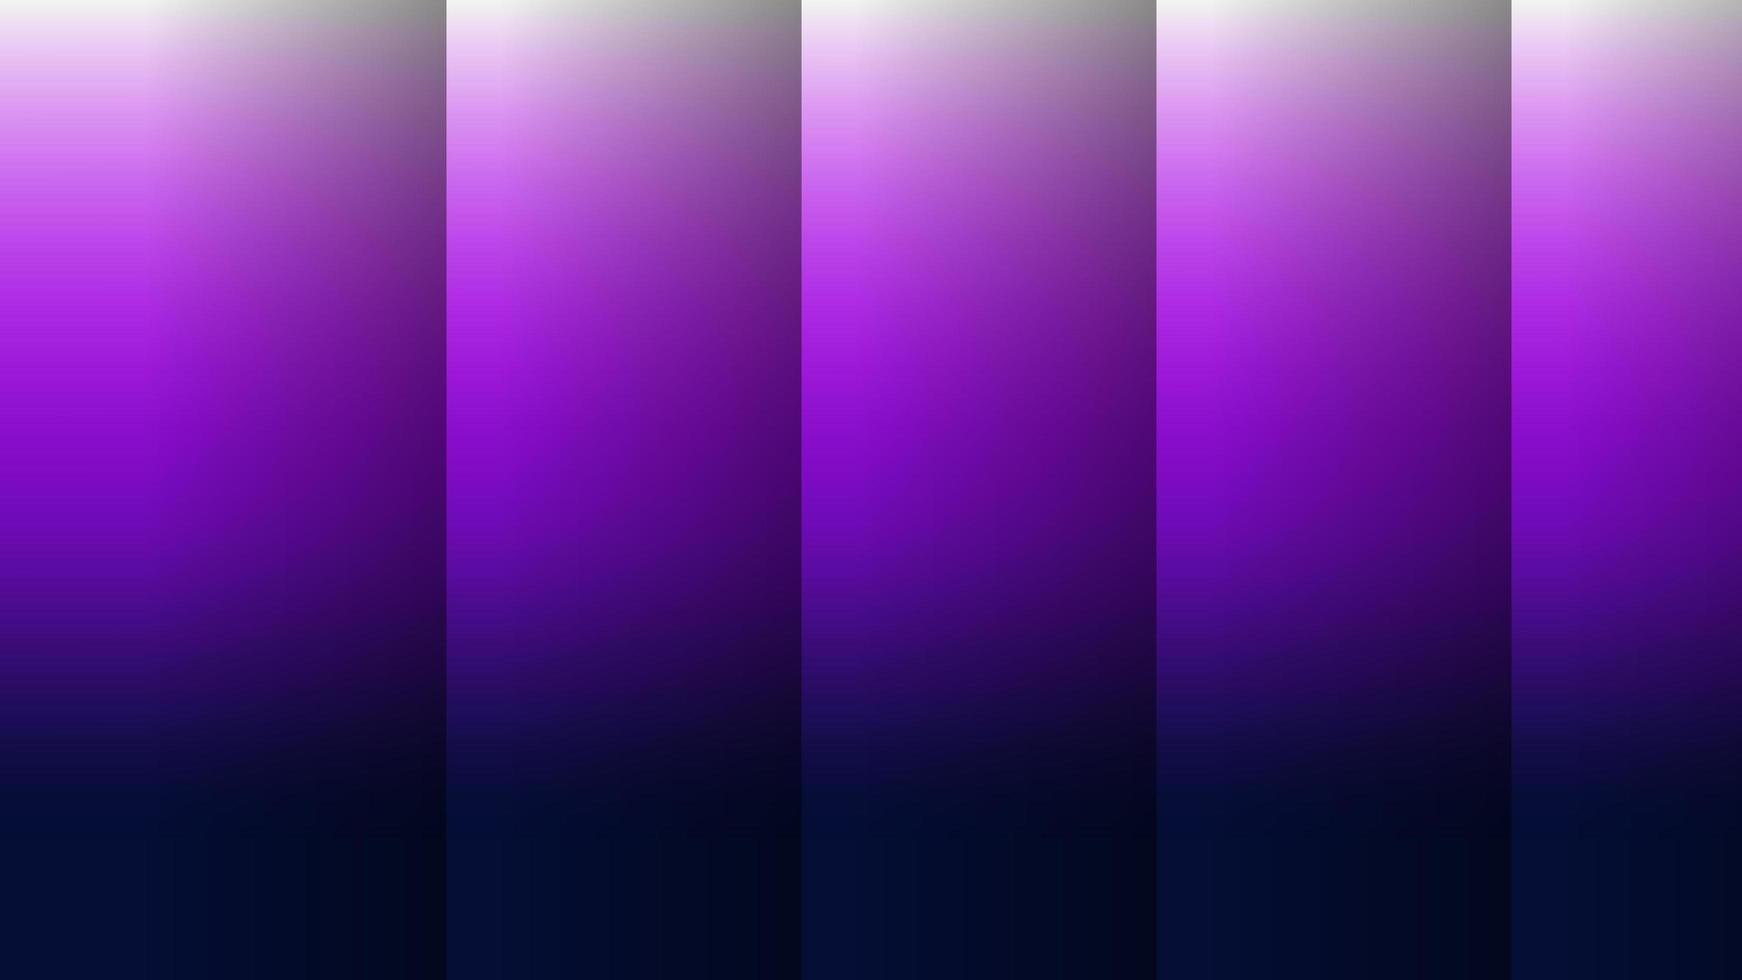 Minimal background purple and dark blue with many indentations forming a square, suitable for design needs, display, website, UI, and others photo